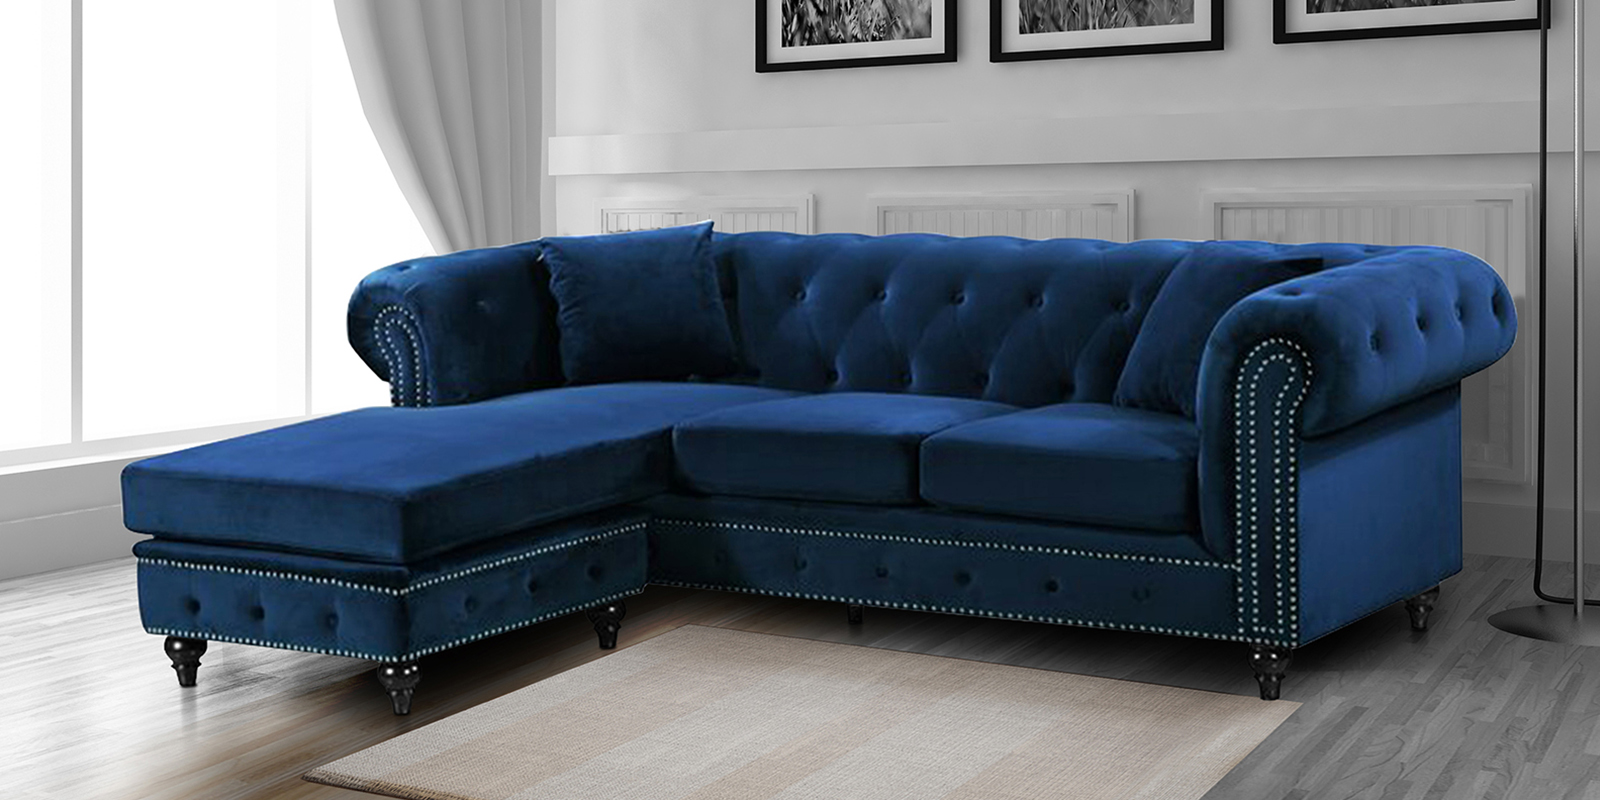 Courageous Velvet RHS Sectional Sofa in Navy Blue Colour - Dreamzz ...